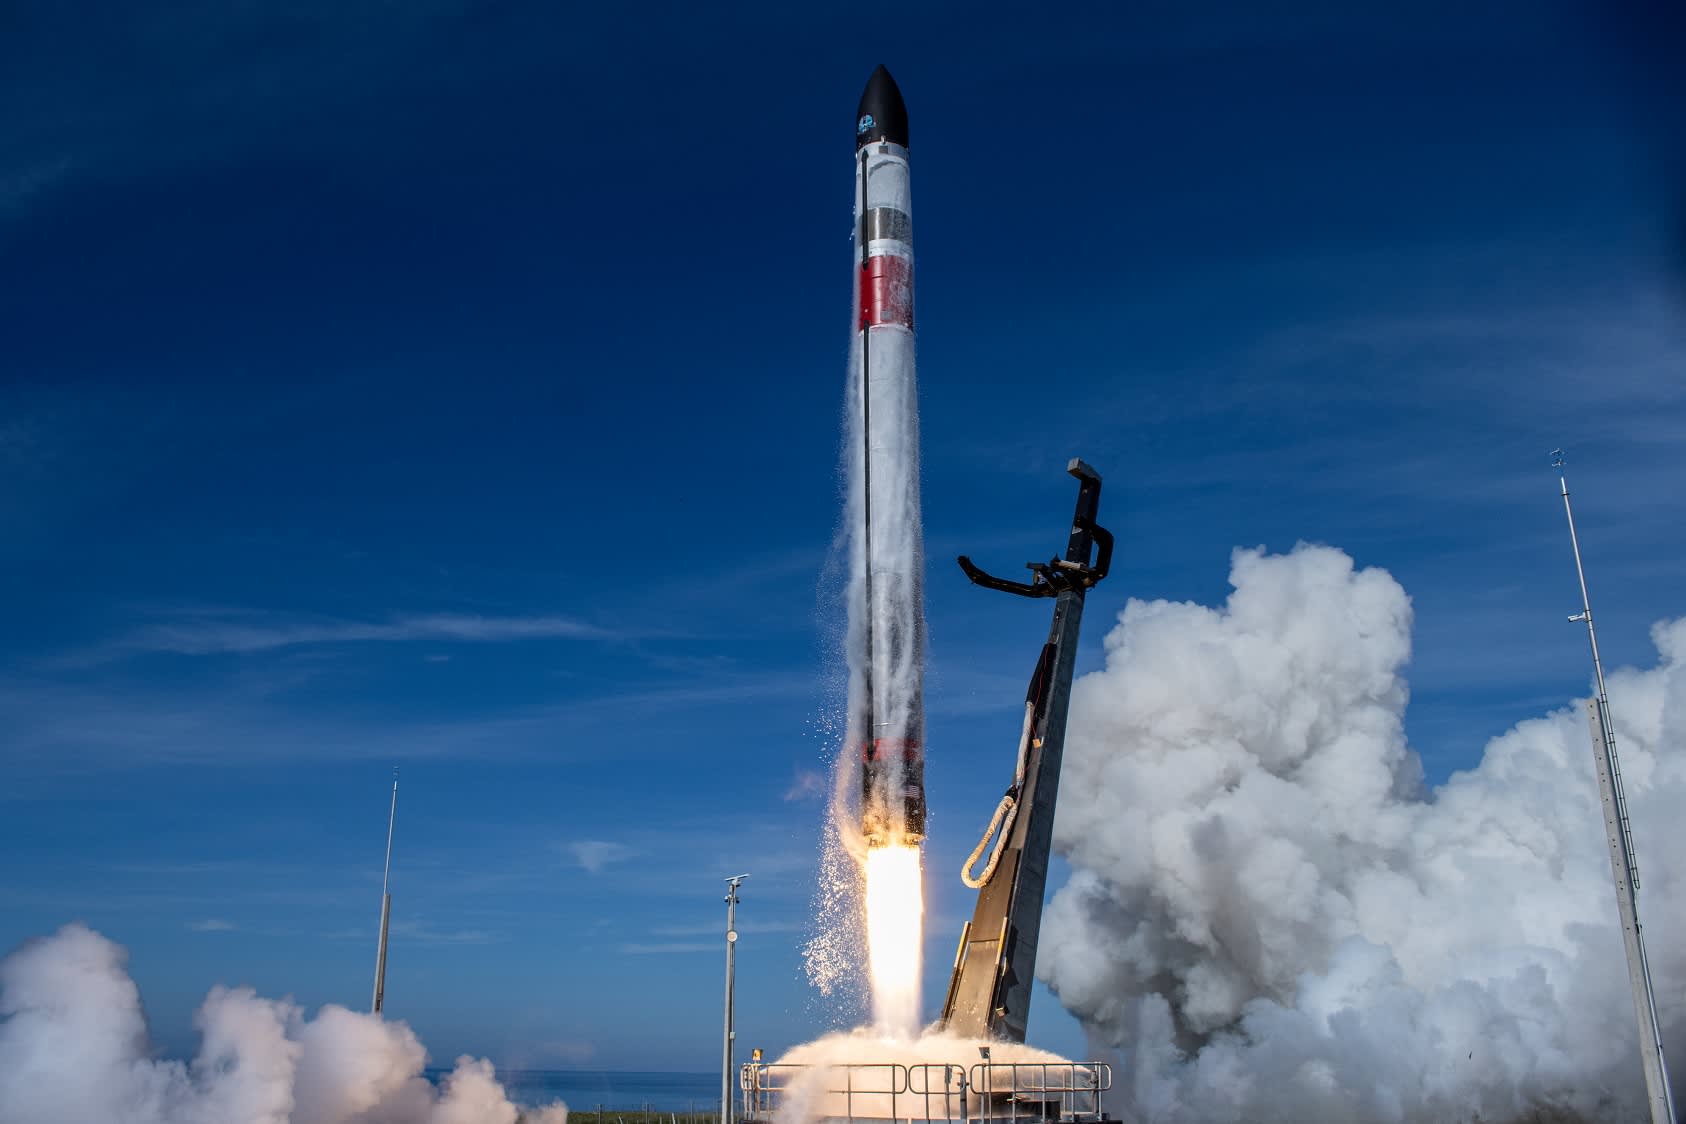 Rocket Lab could surge 55% as leader in launch market, Cowen says